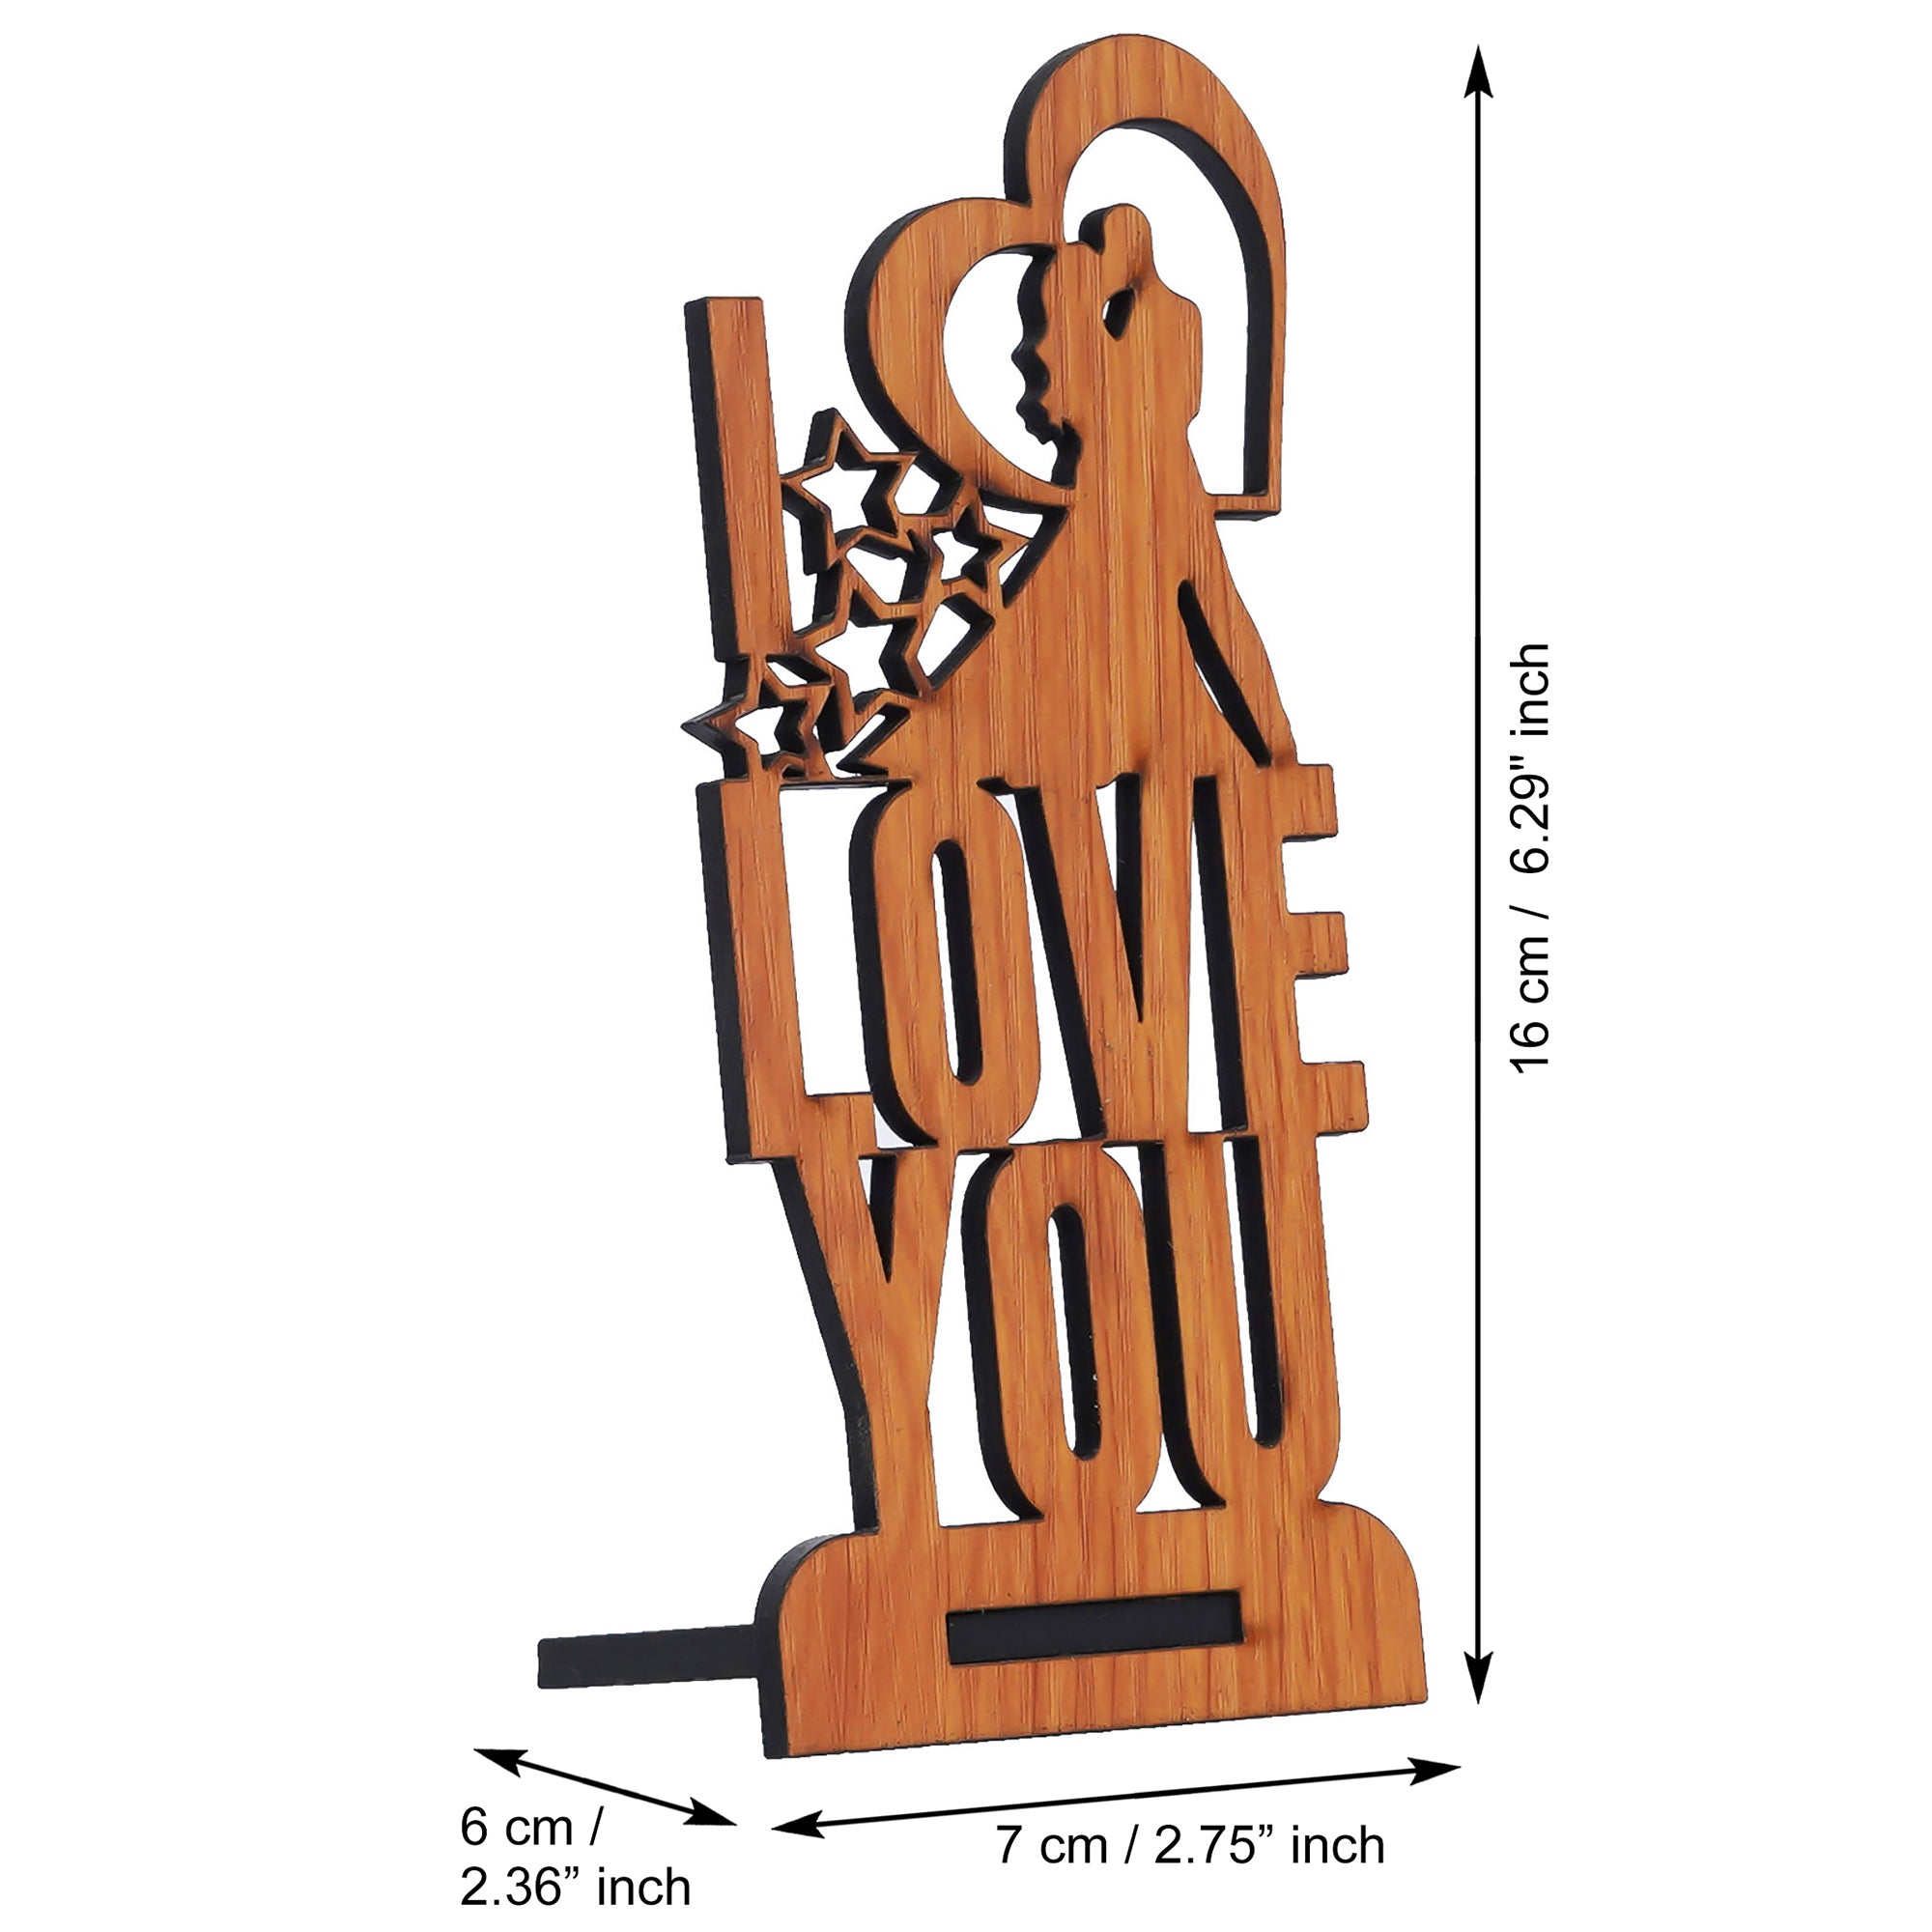 Valentine Combo of Golden Rose Gift Set, "Love You" Wooden Showpiece With Stand, Bride Kissing Groom Romantic Polyresin Decorative Showpiece 4